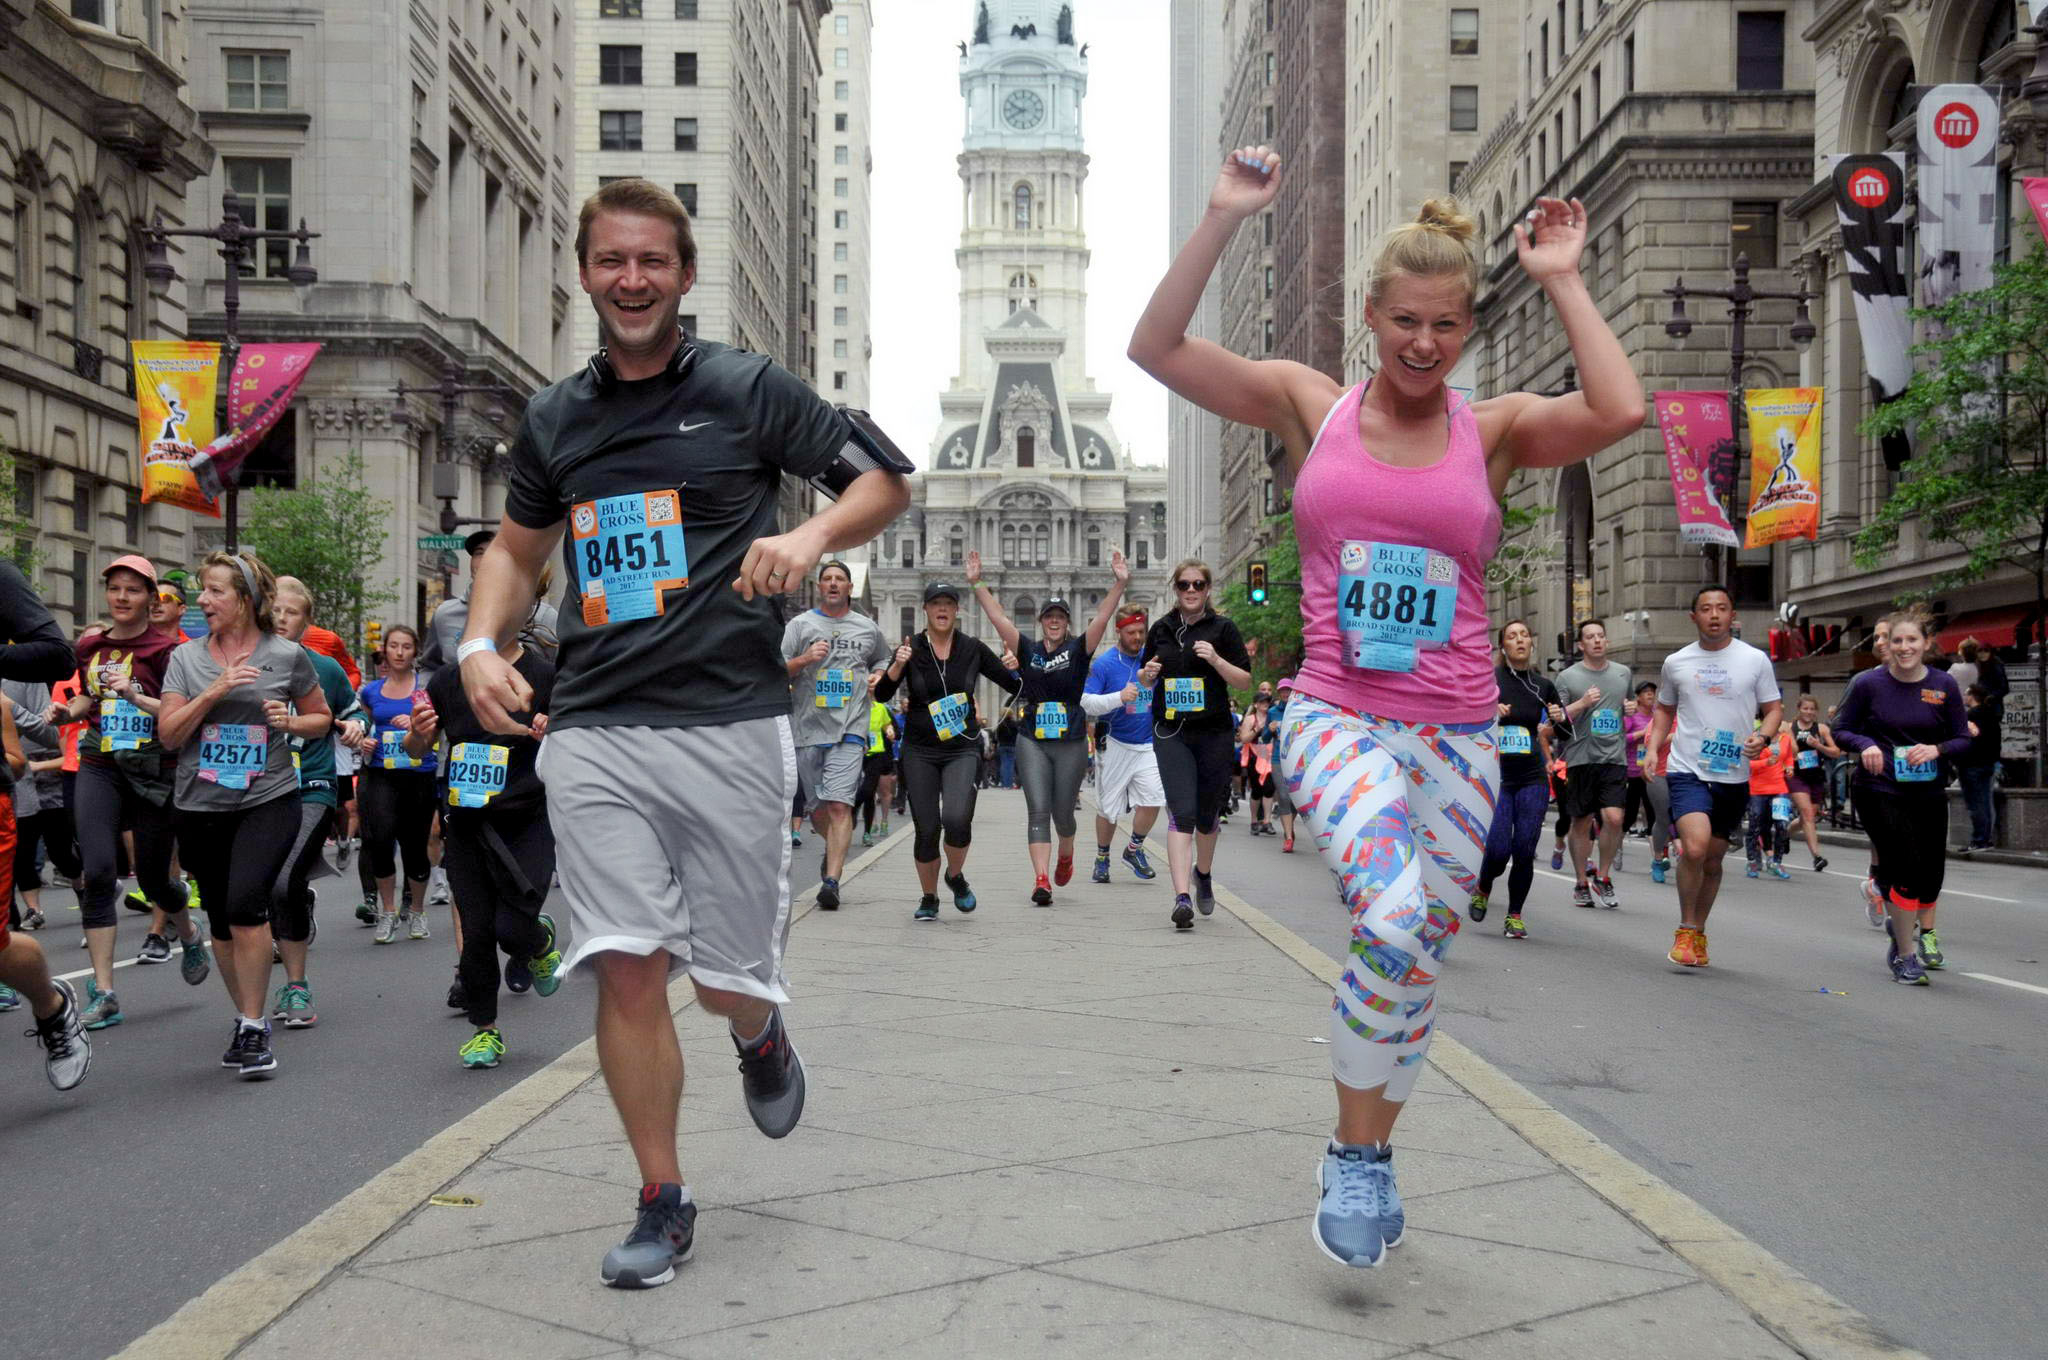 Man And Woman Participating In Fearless Fit Run